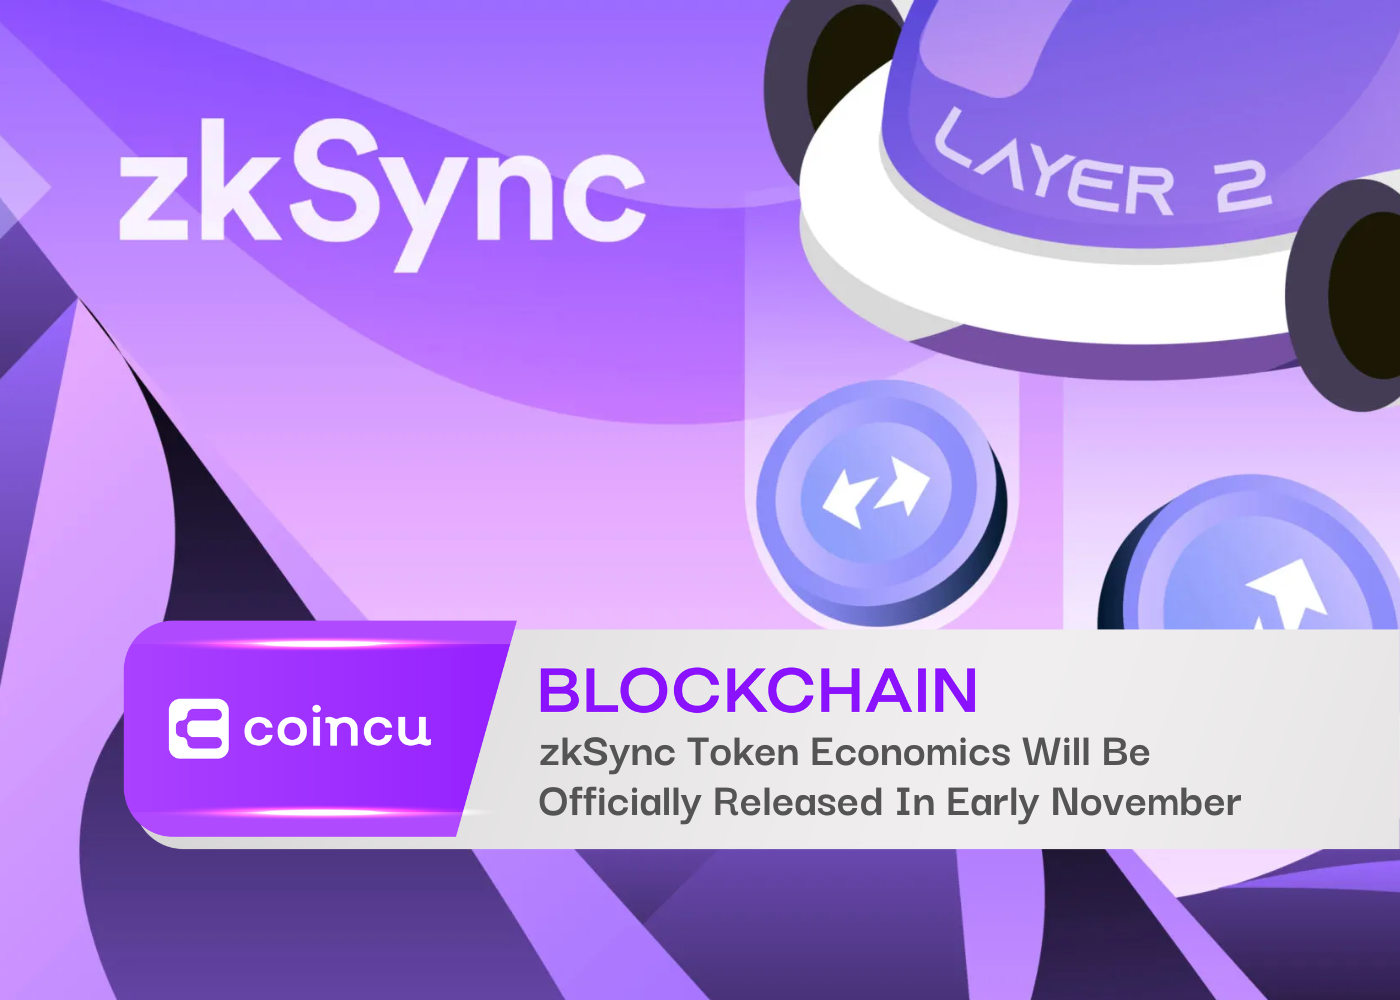 zkSync Token Economics Will Be Officially Released In Early November